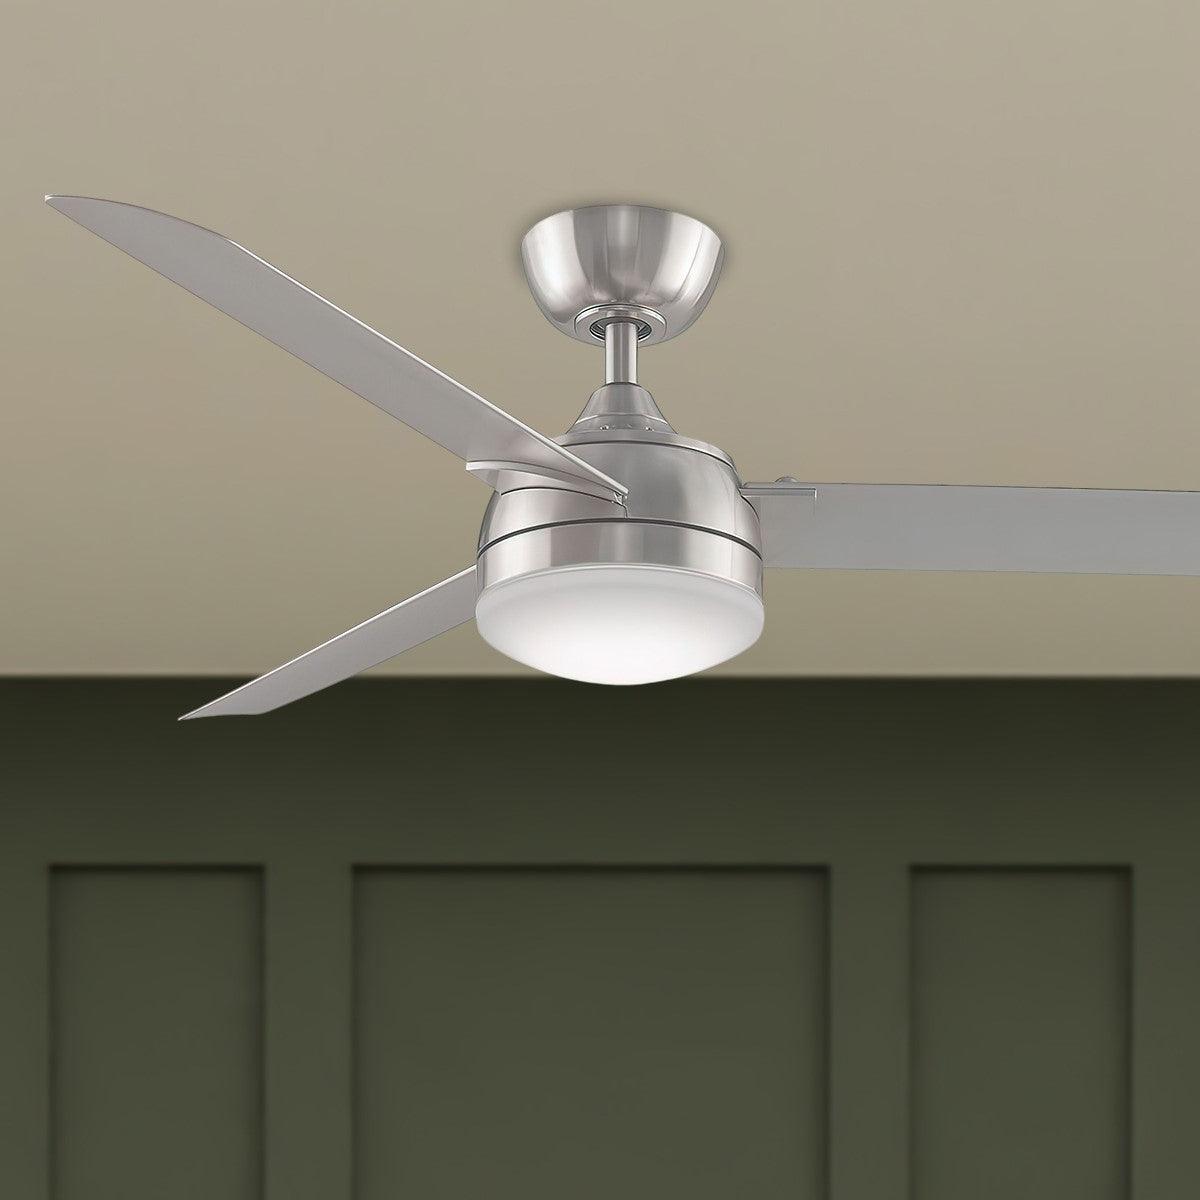 Xeno 56 Inch Large Modern Indoor/Outdoor Ceiling Fan With Light And Remote, Brushed Nickel Finish